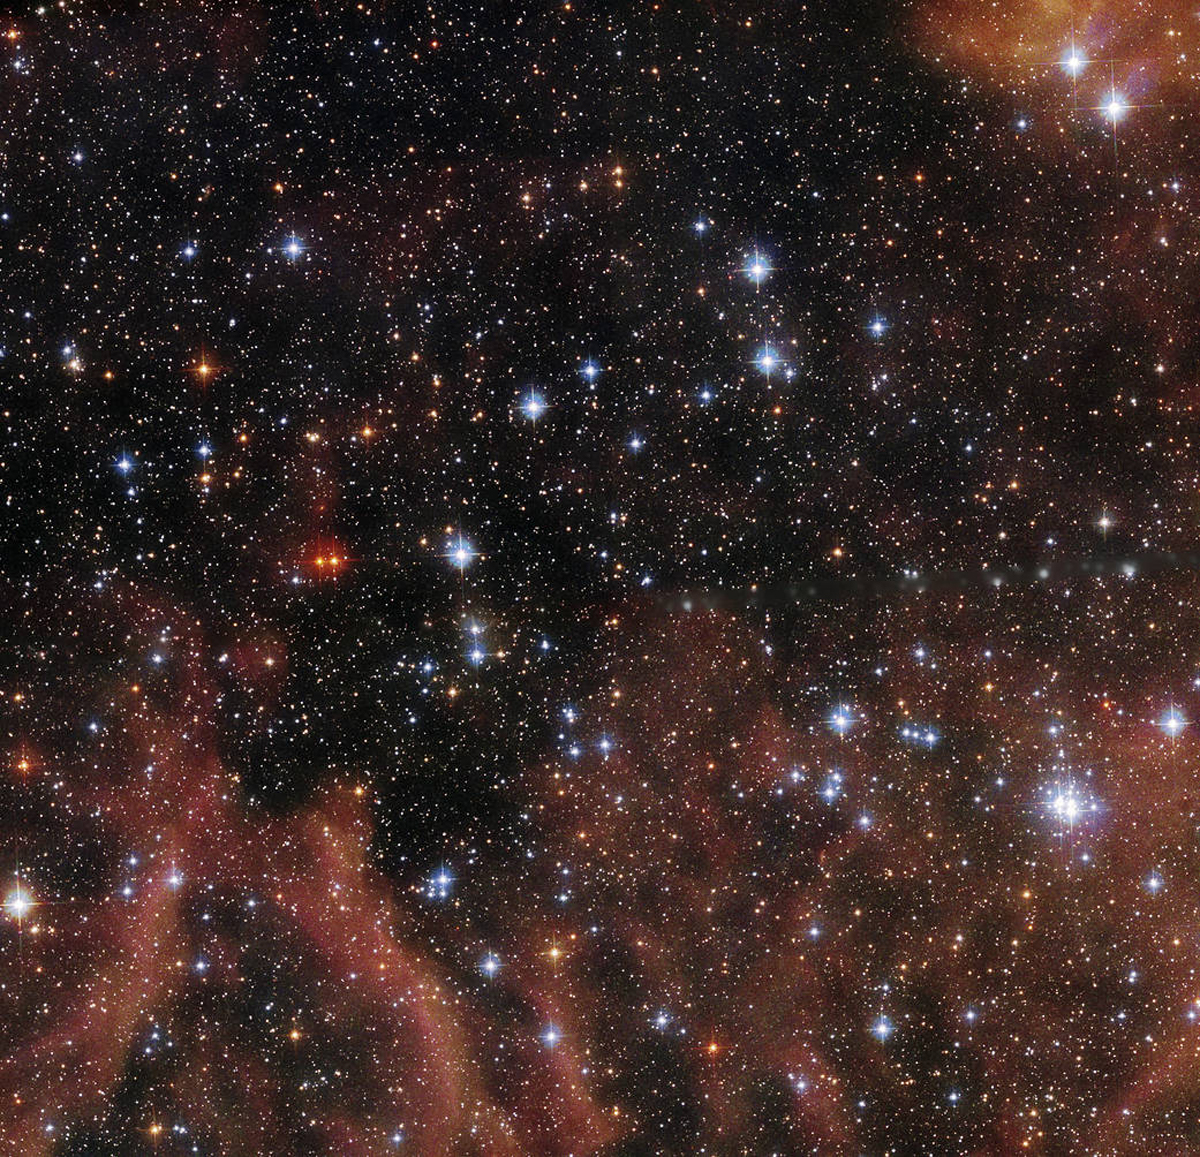 This Hubble Space Telescope image shows the open cluster BSDL 2757, located in the Large Magellanic Cloud dwarf galaxy.